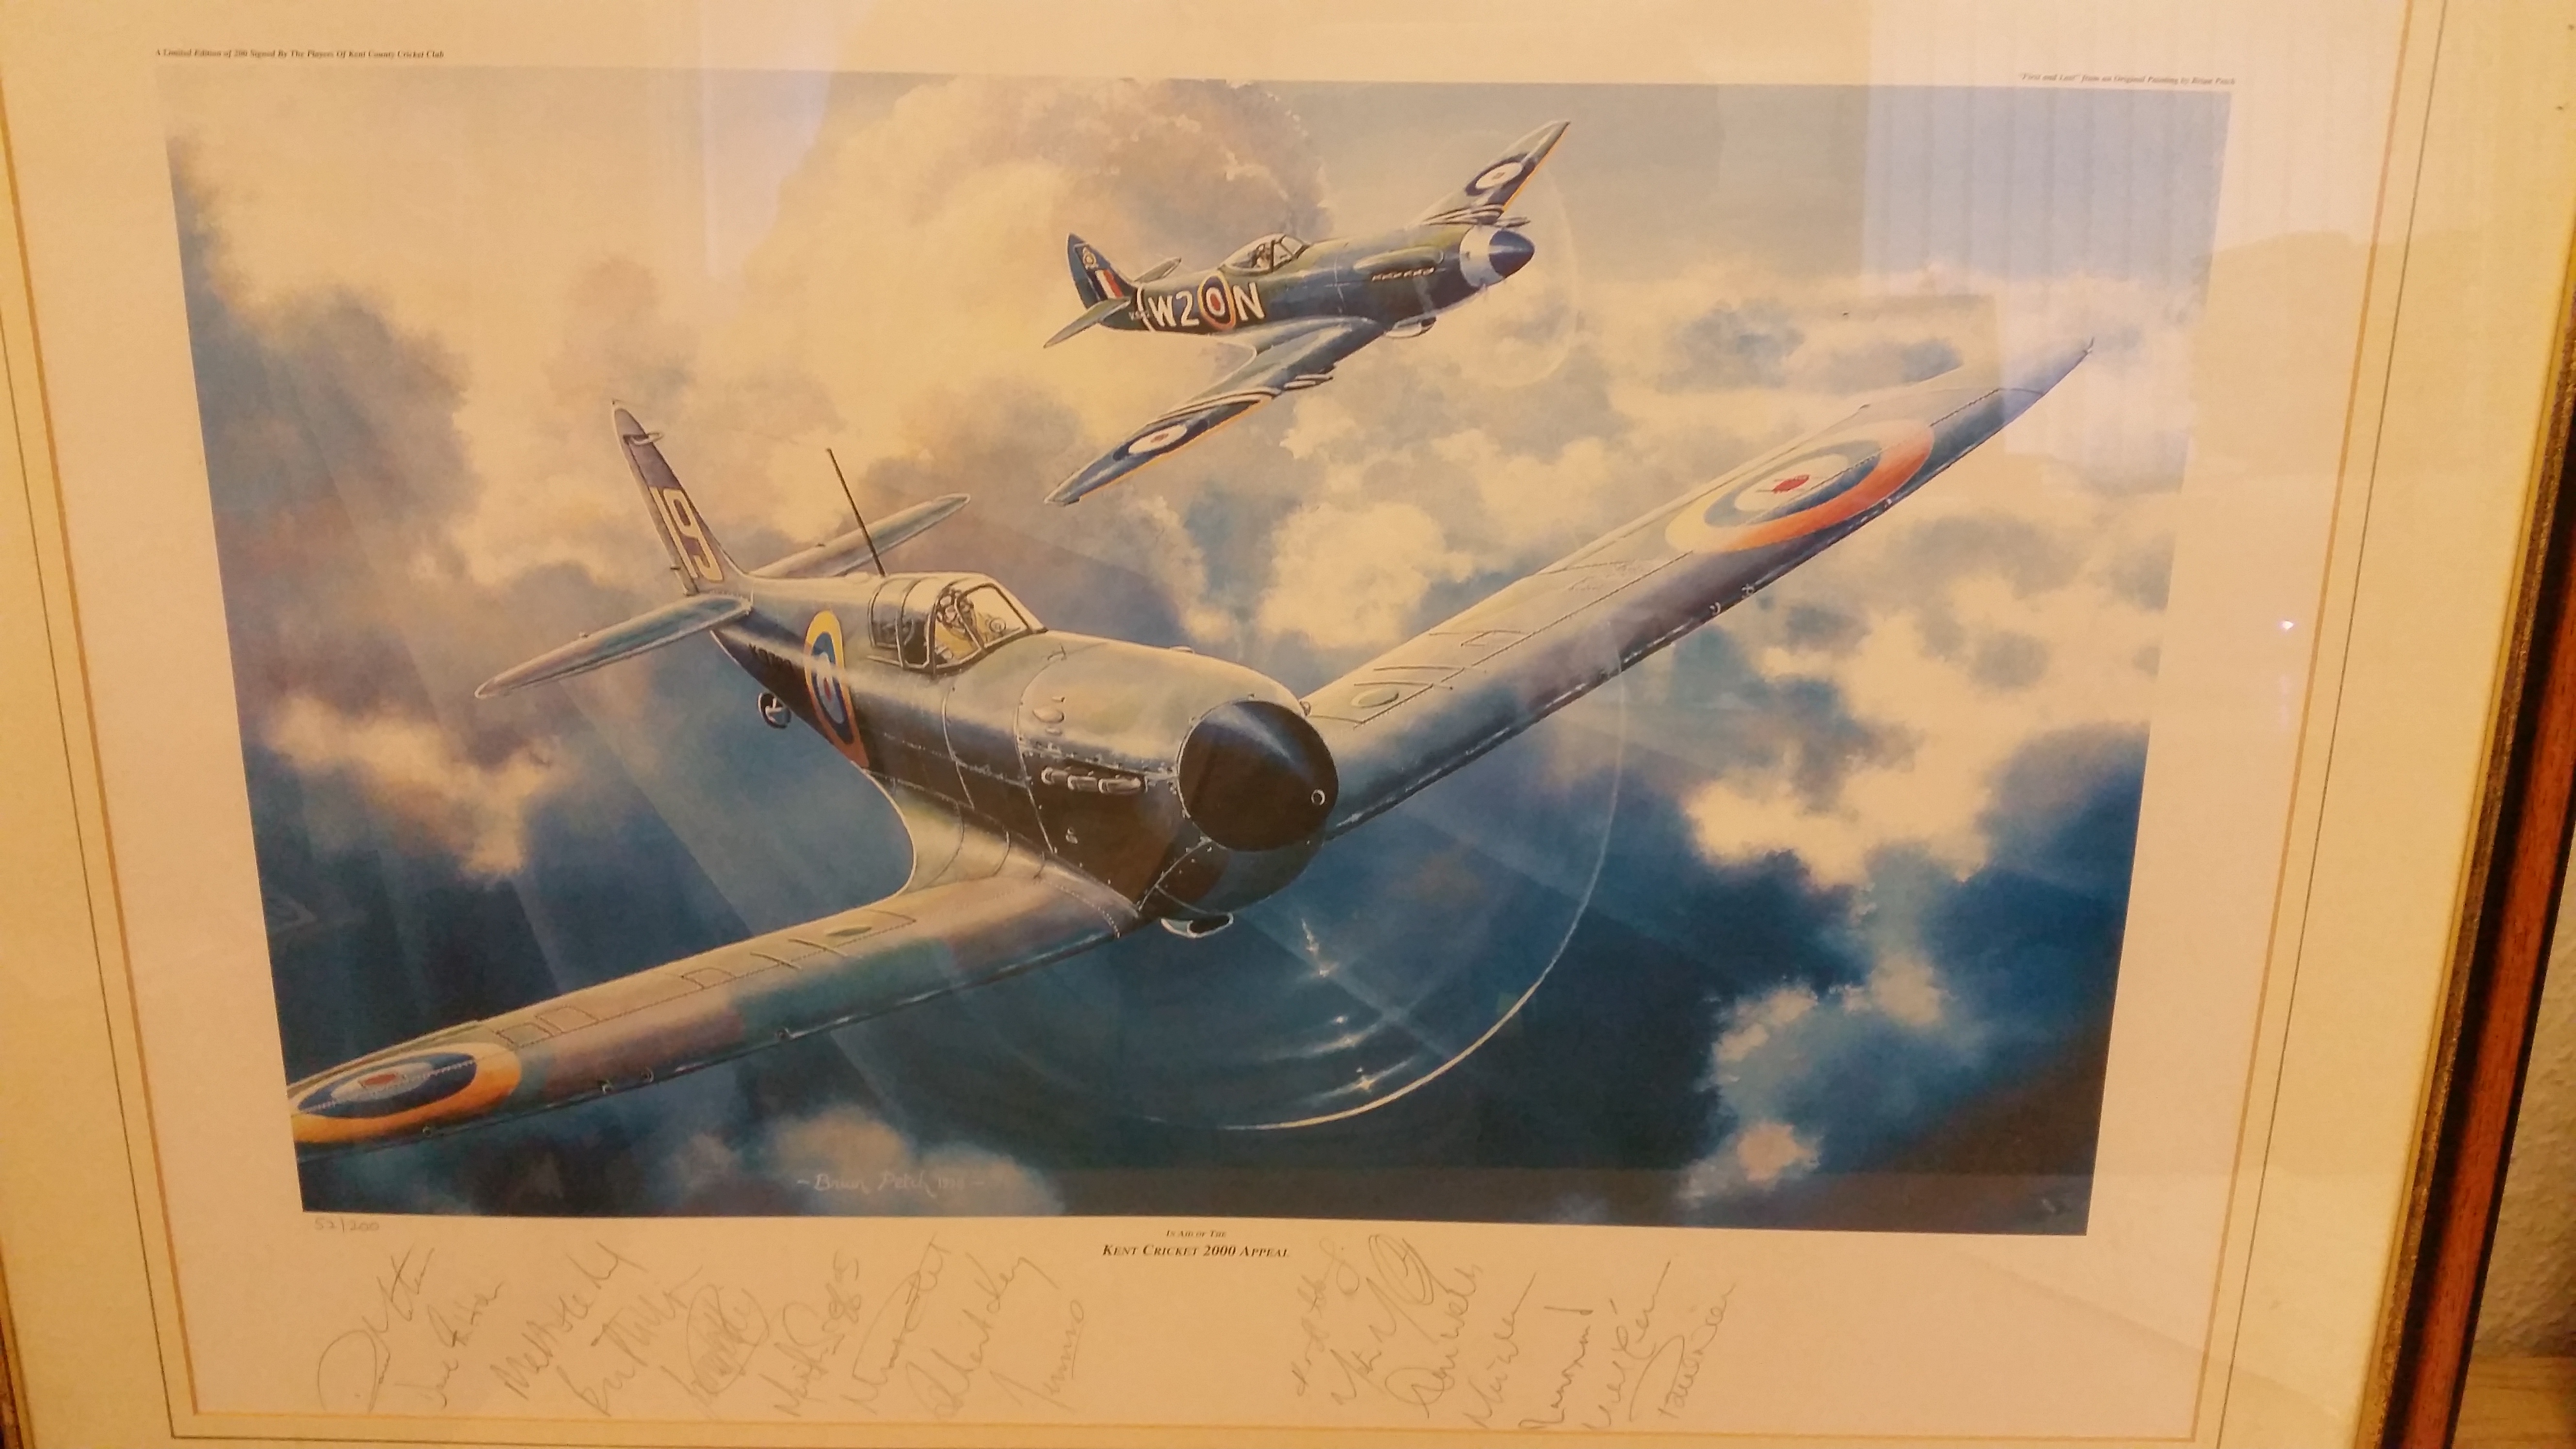 CRICKET, signed Kent CCC colour print of Spitfire, by 16 players, inc. Saggers, Key, McCague, Alan